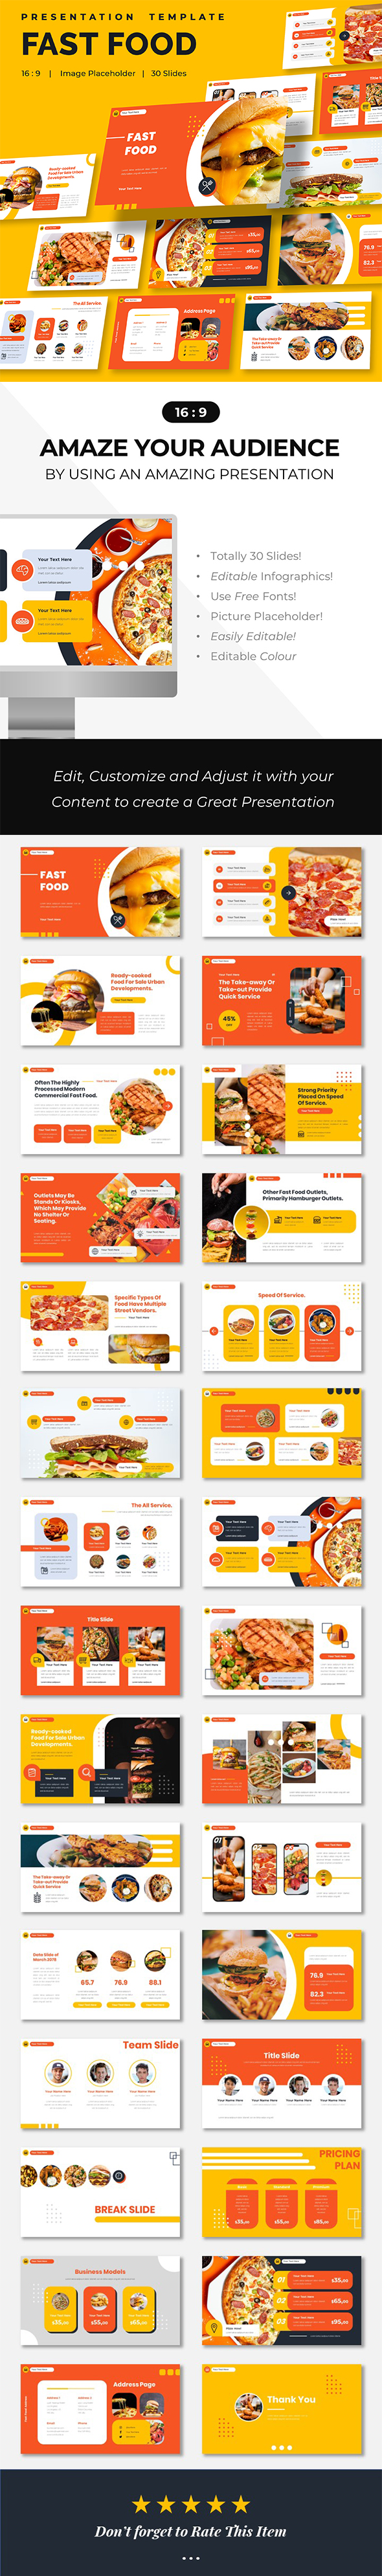 [DOWNLOAD]Fast Food - Service Culinary Business Presentation Powerpoint Template